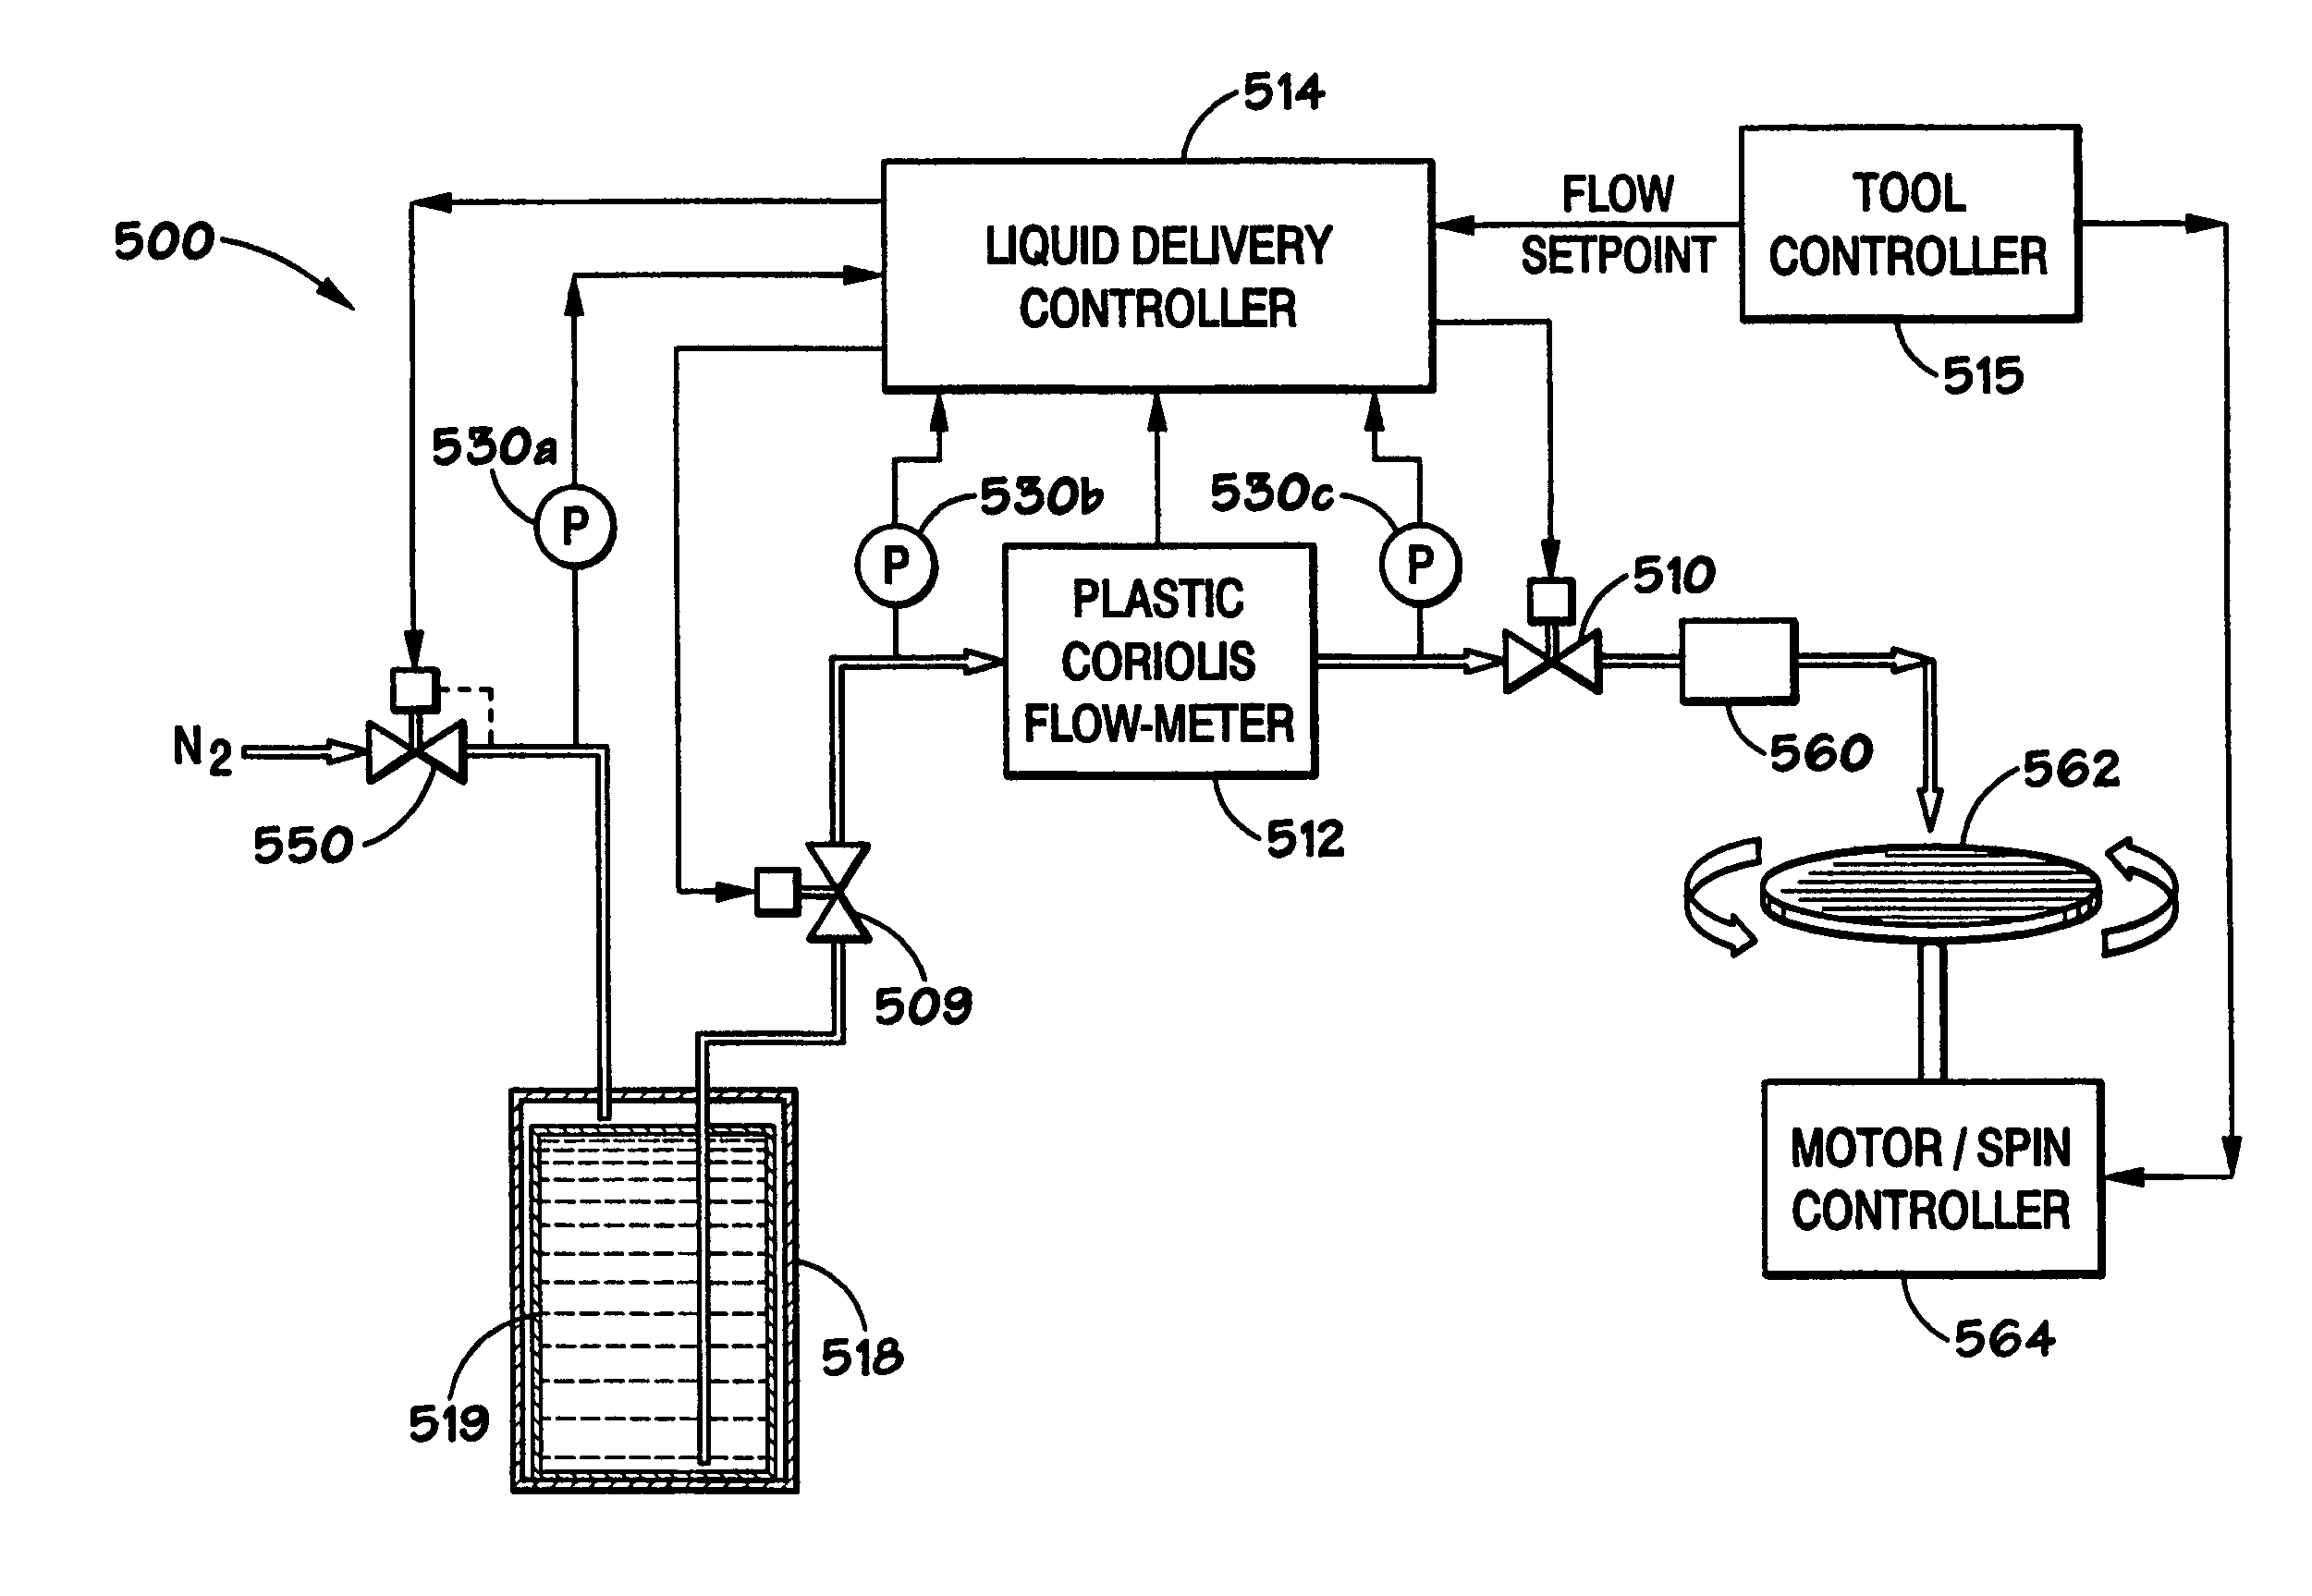 High purity fluid delivery system